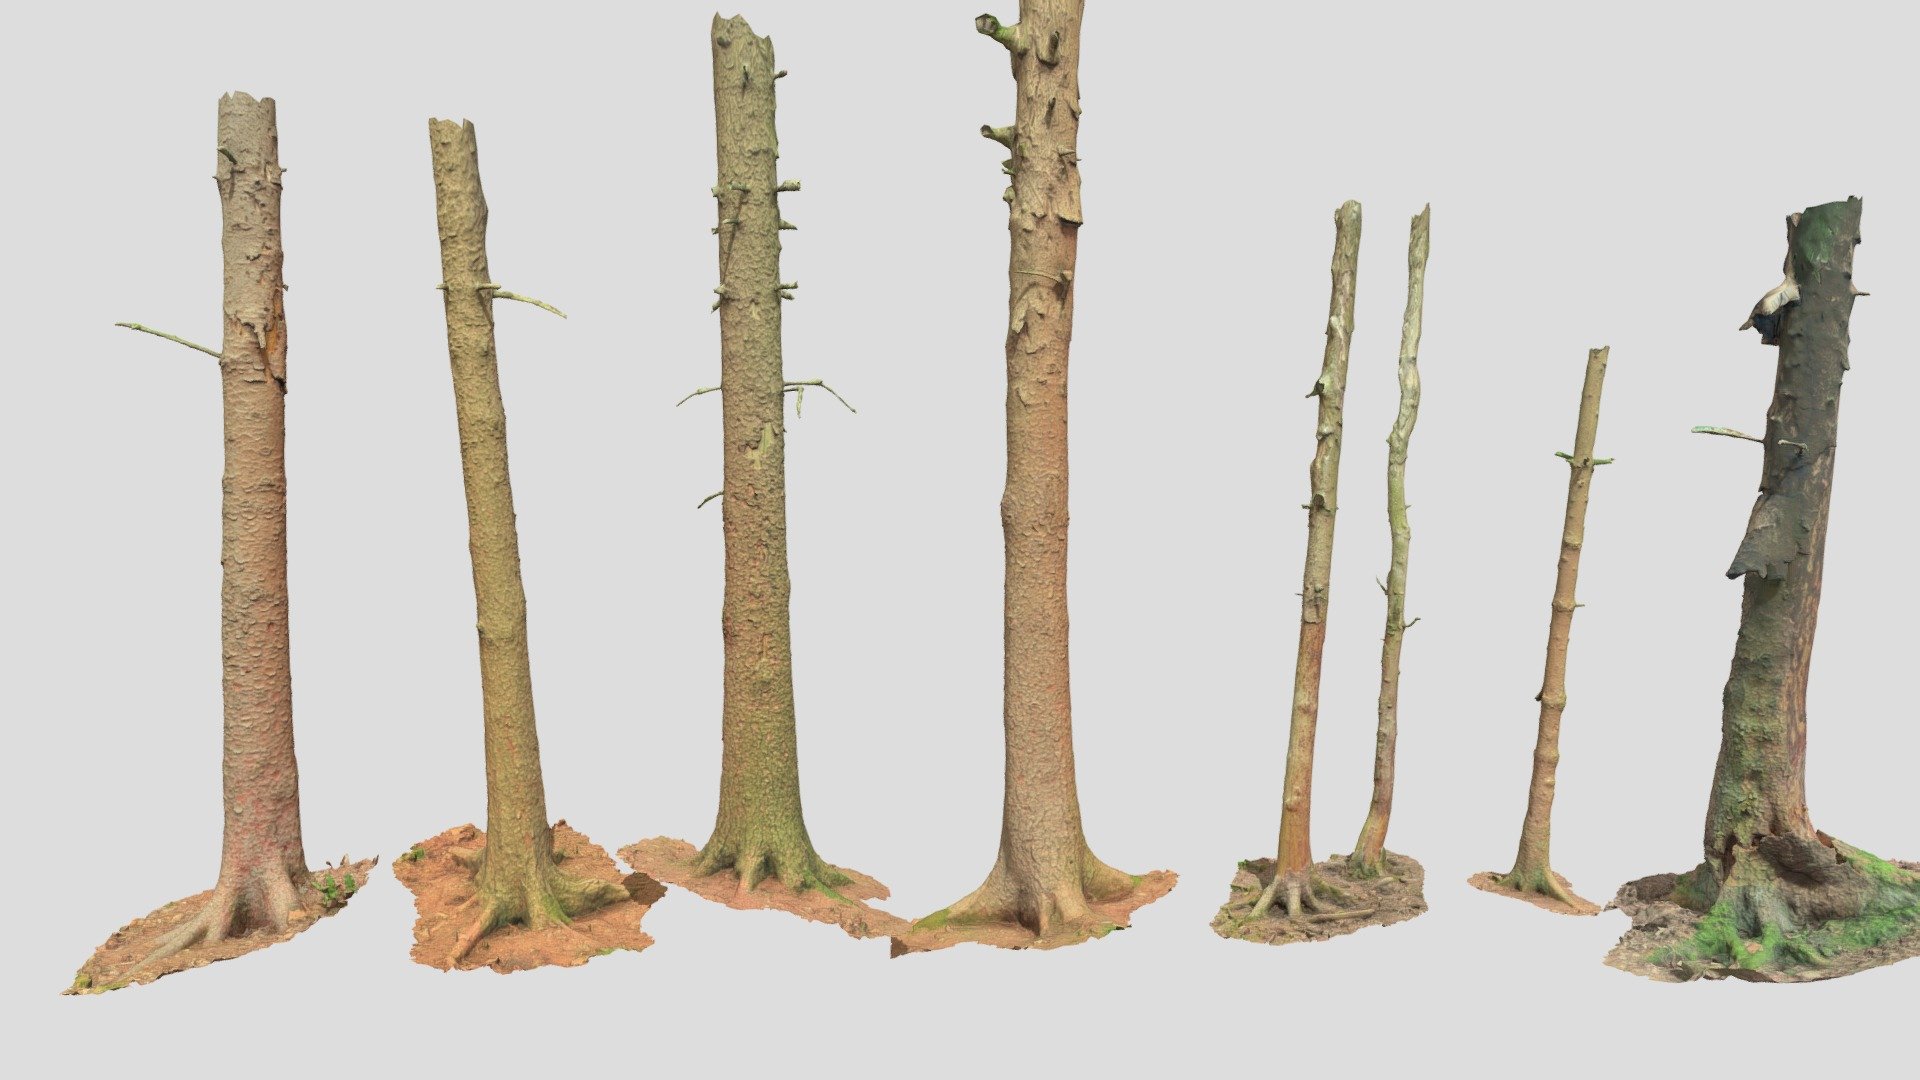 4K Each: Fully processed PBR 3D scans: no light information, color-matched, etc.

4K Textures: 
- Normal 
- Albedo 
- Roughness

Realistic Fir Conifer Tree Trunk Dead Scan - Fir Conifer Tree Trunk Dead Scan - Buy Royalty Free 3D model by Per's Scan Collection (@perz_scans) 3d model